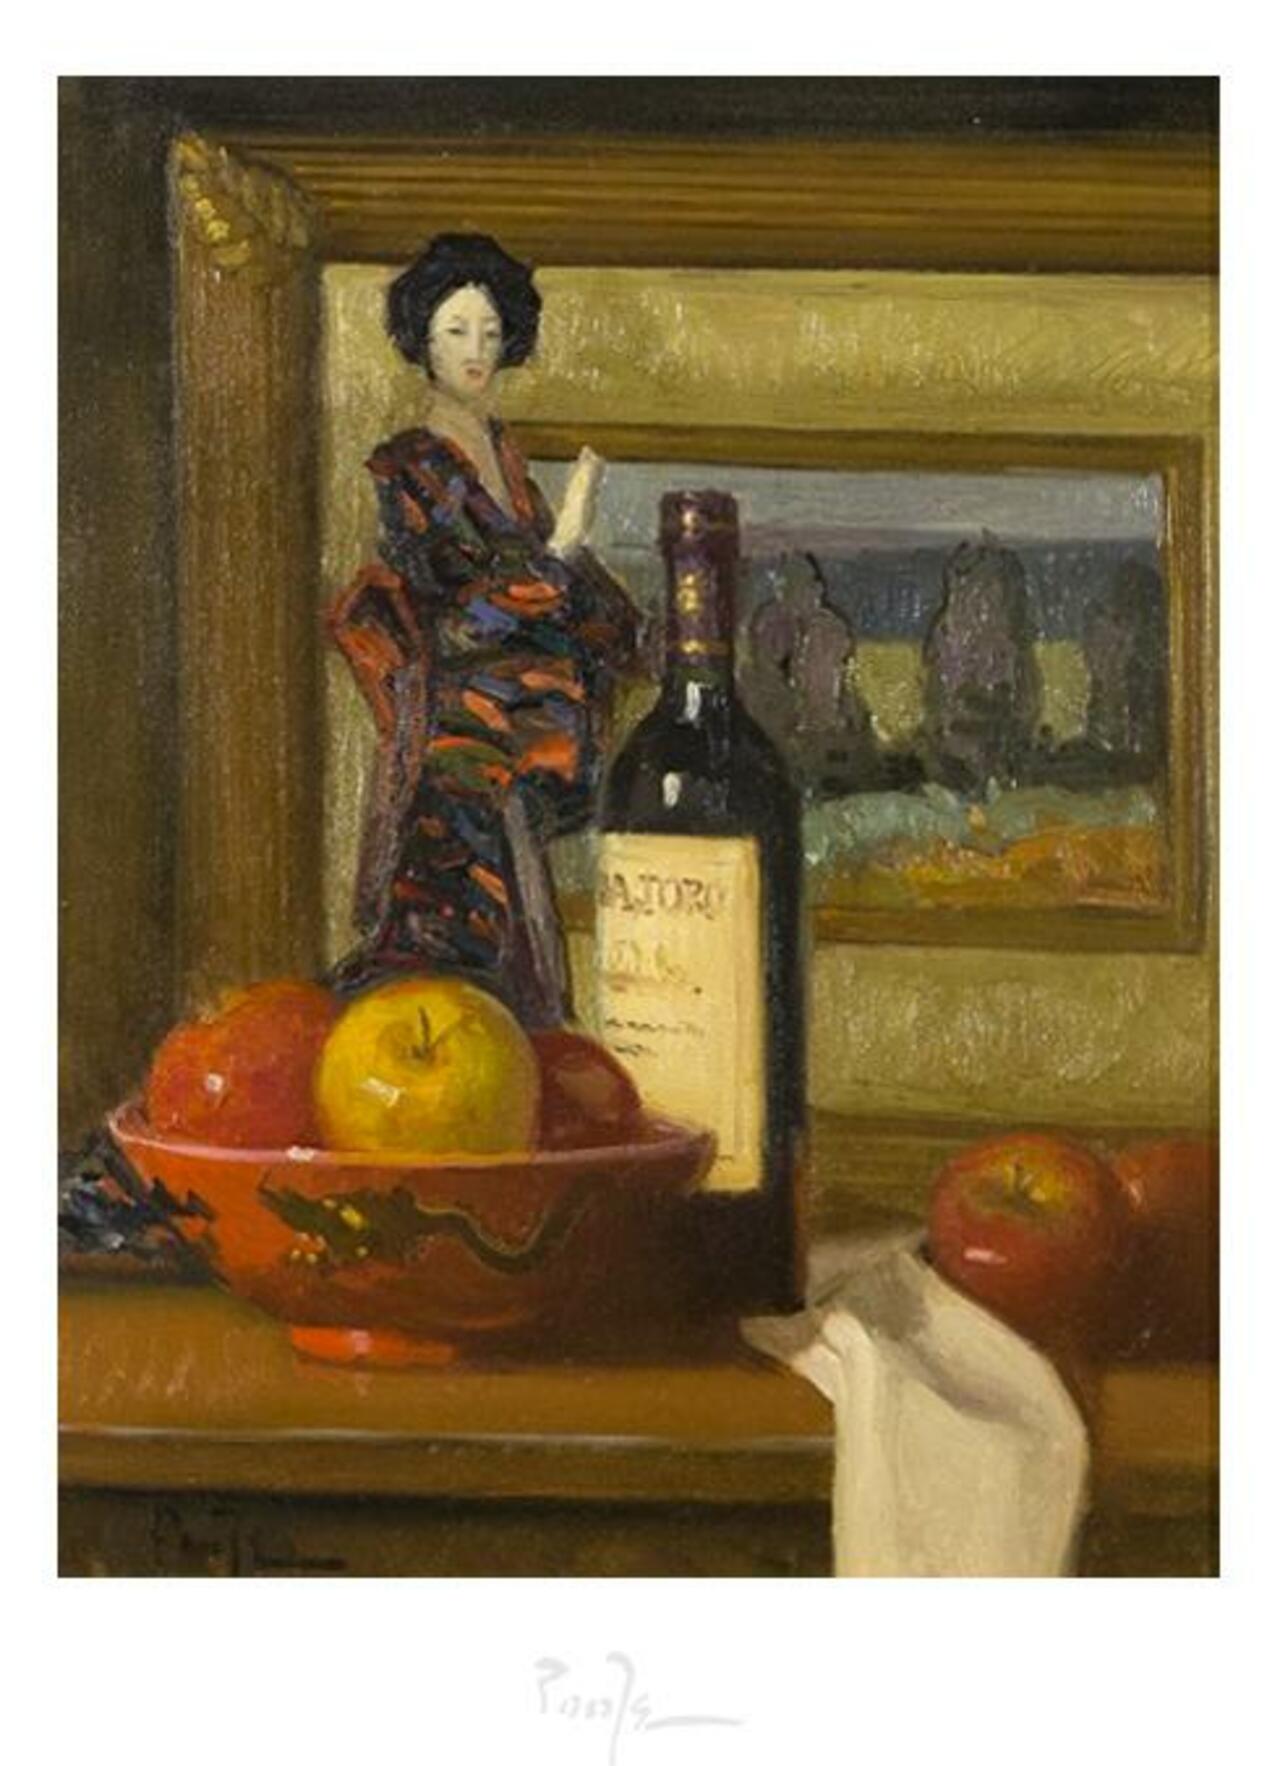 #Poole #Painting of the Day! "Figurine with Wine and Apples" #Oklahoma #Art #StillLife http://t.co/GfAxdkExMr